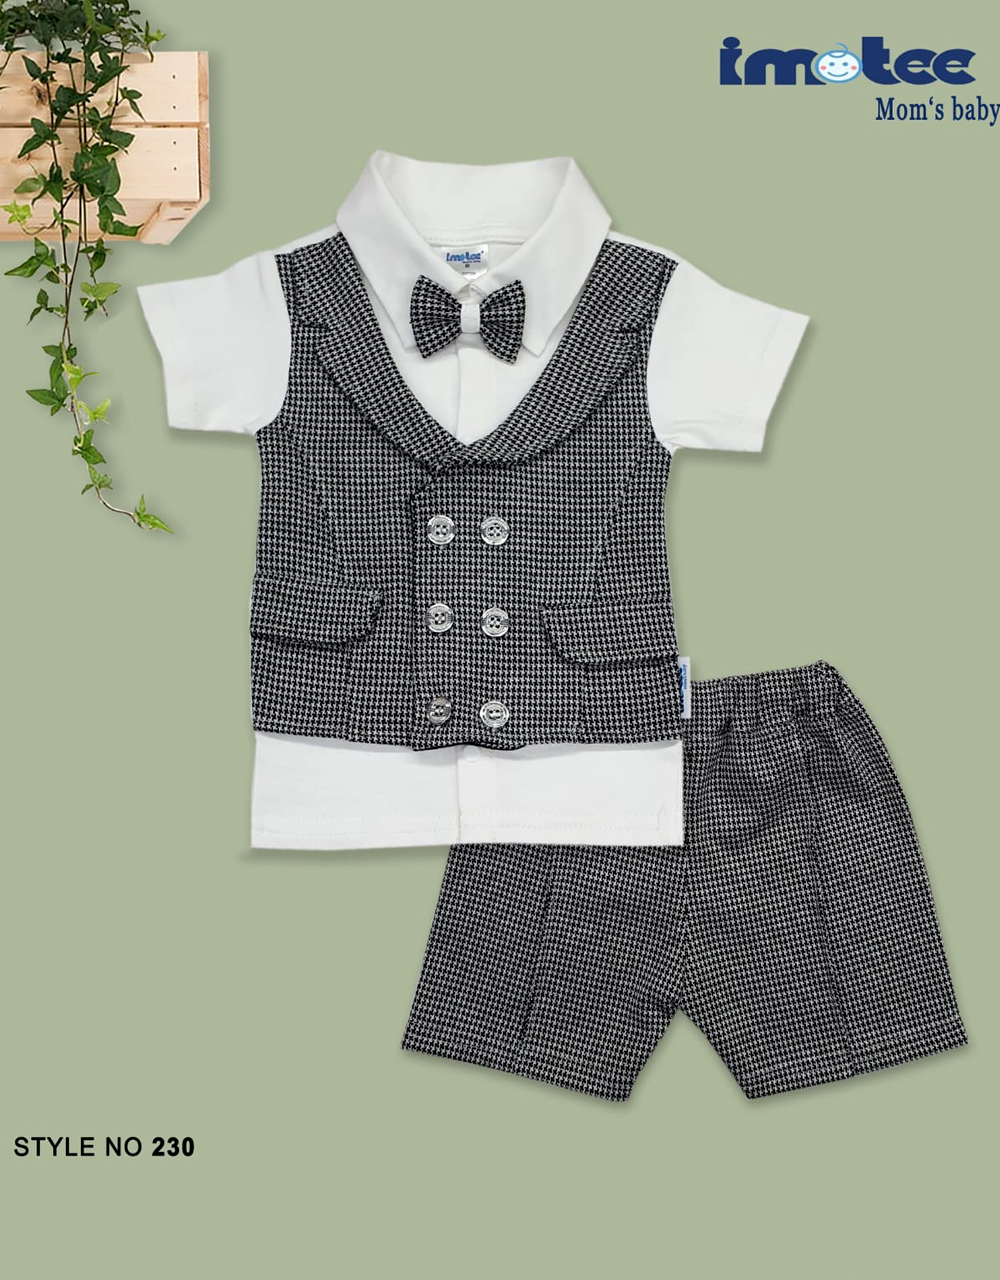 5 Cool Attires for Your Charming Prince! - Baby Couture India